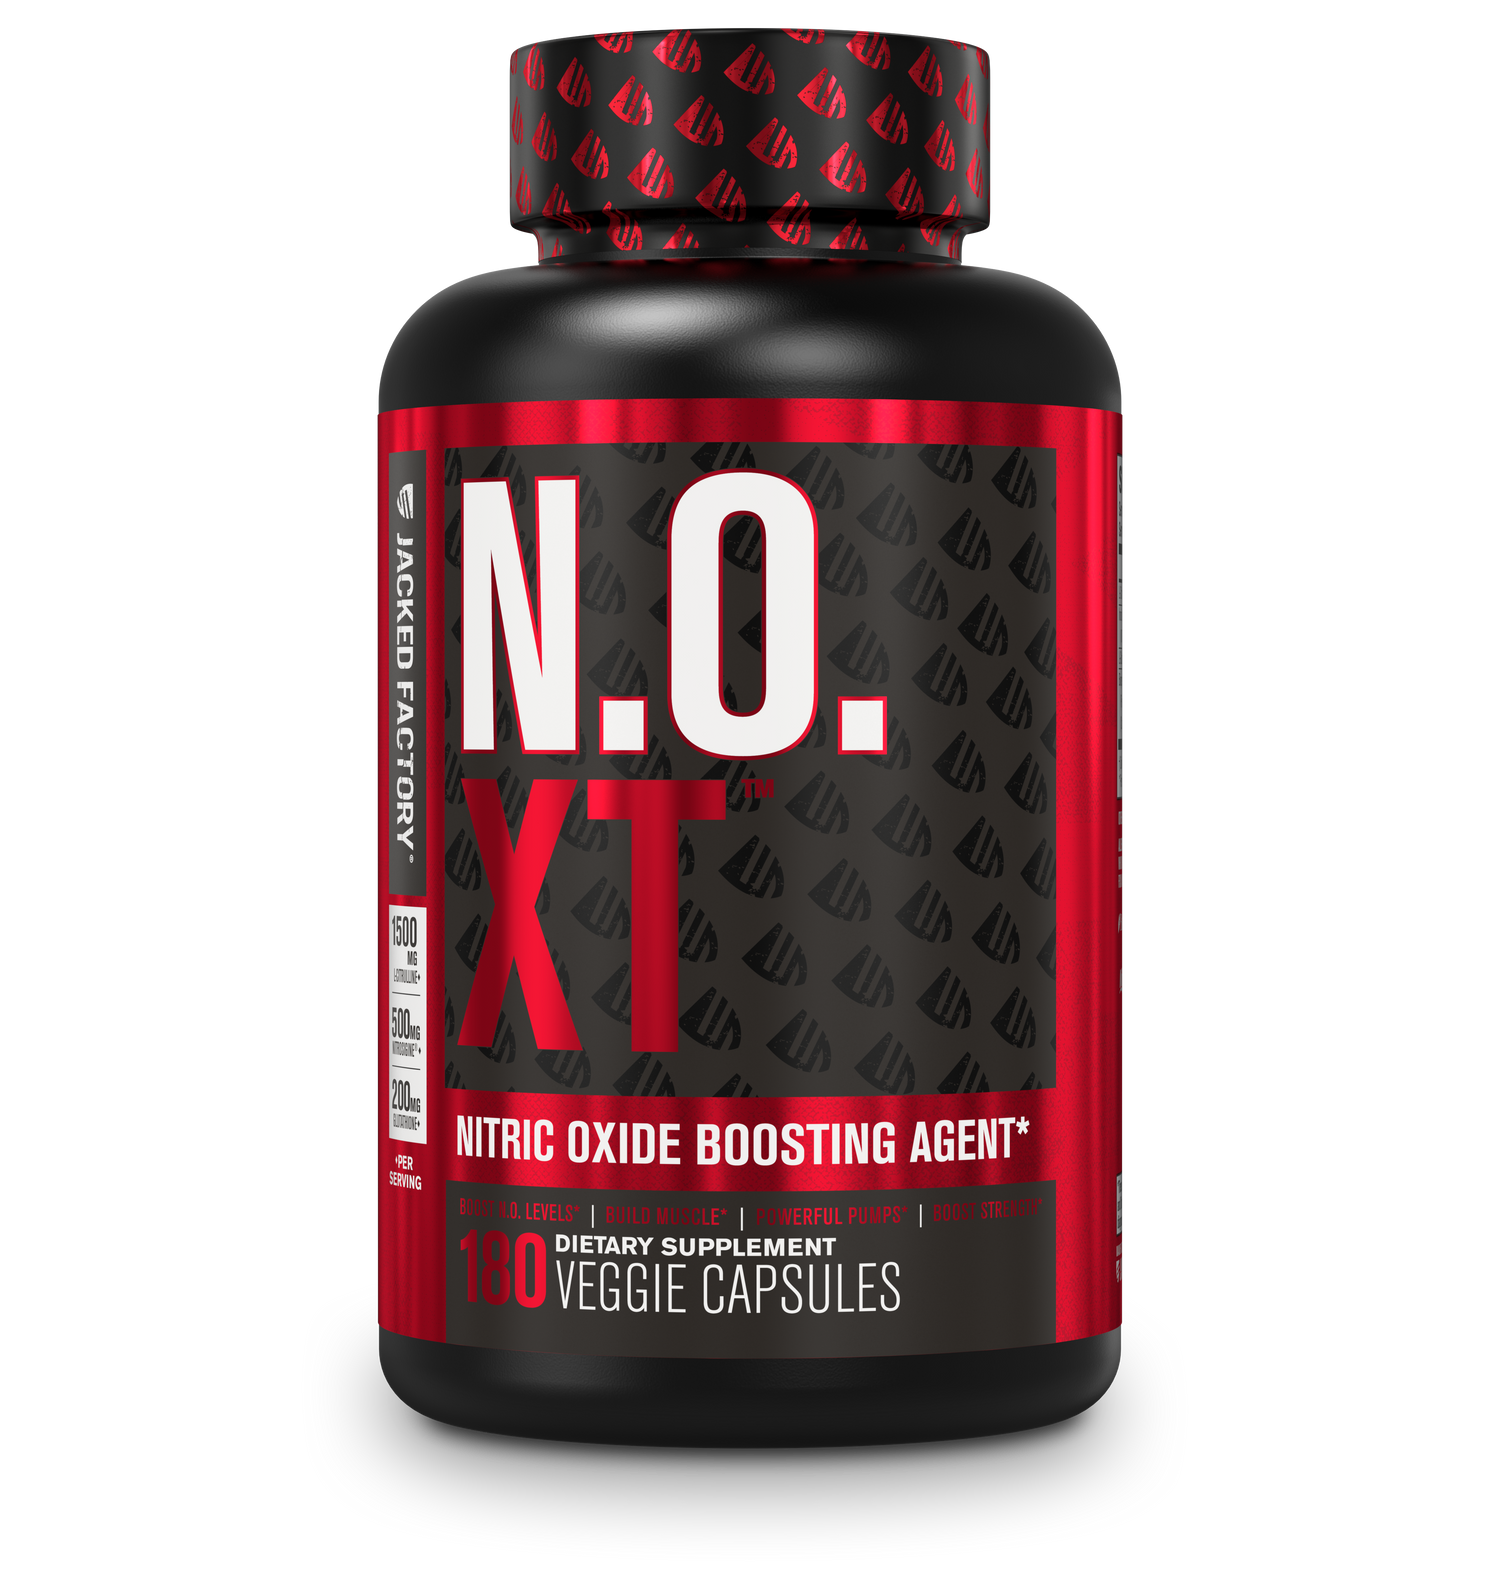 Jacked Factory's N.O. XT (180 veggie capsules) in a black bottle with red label